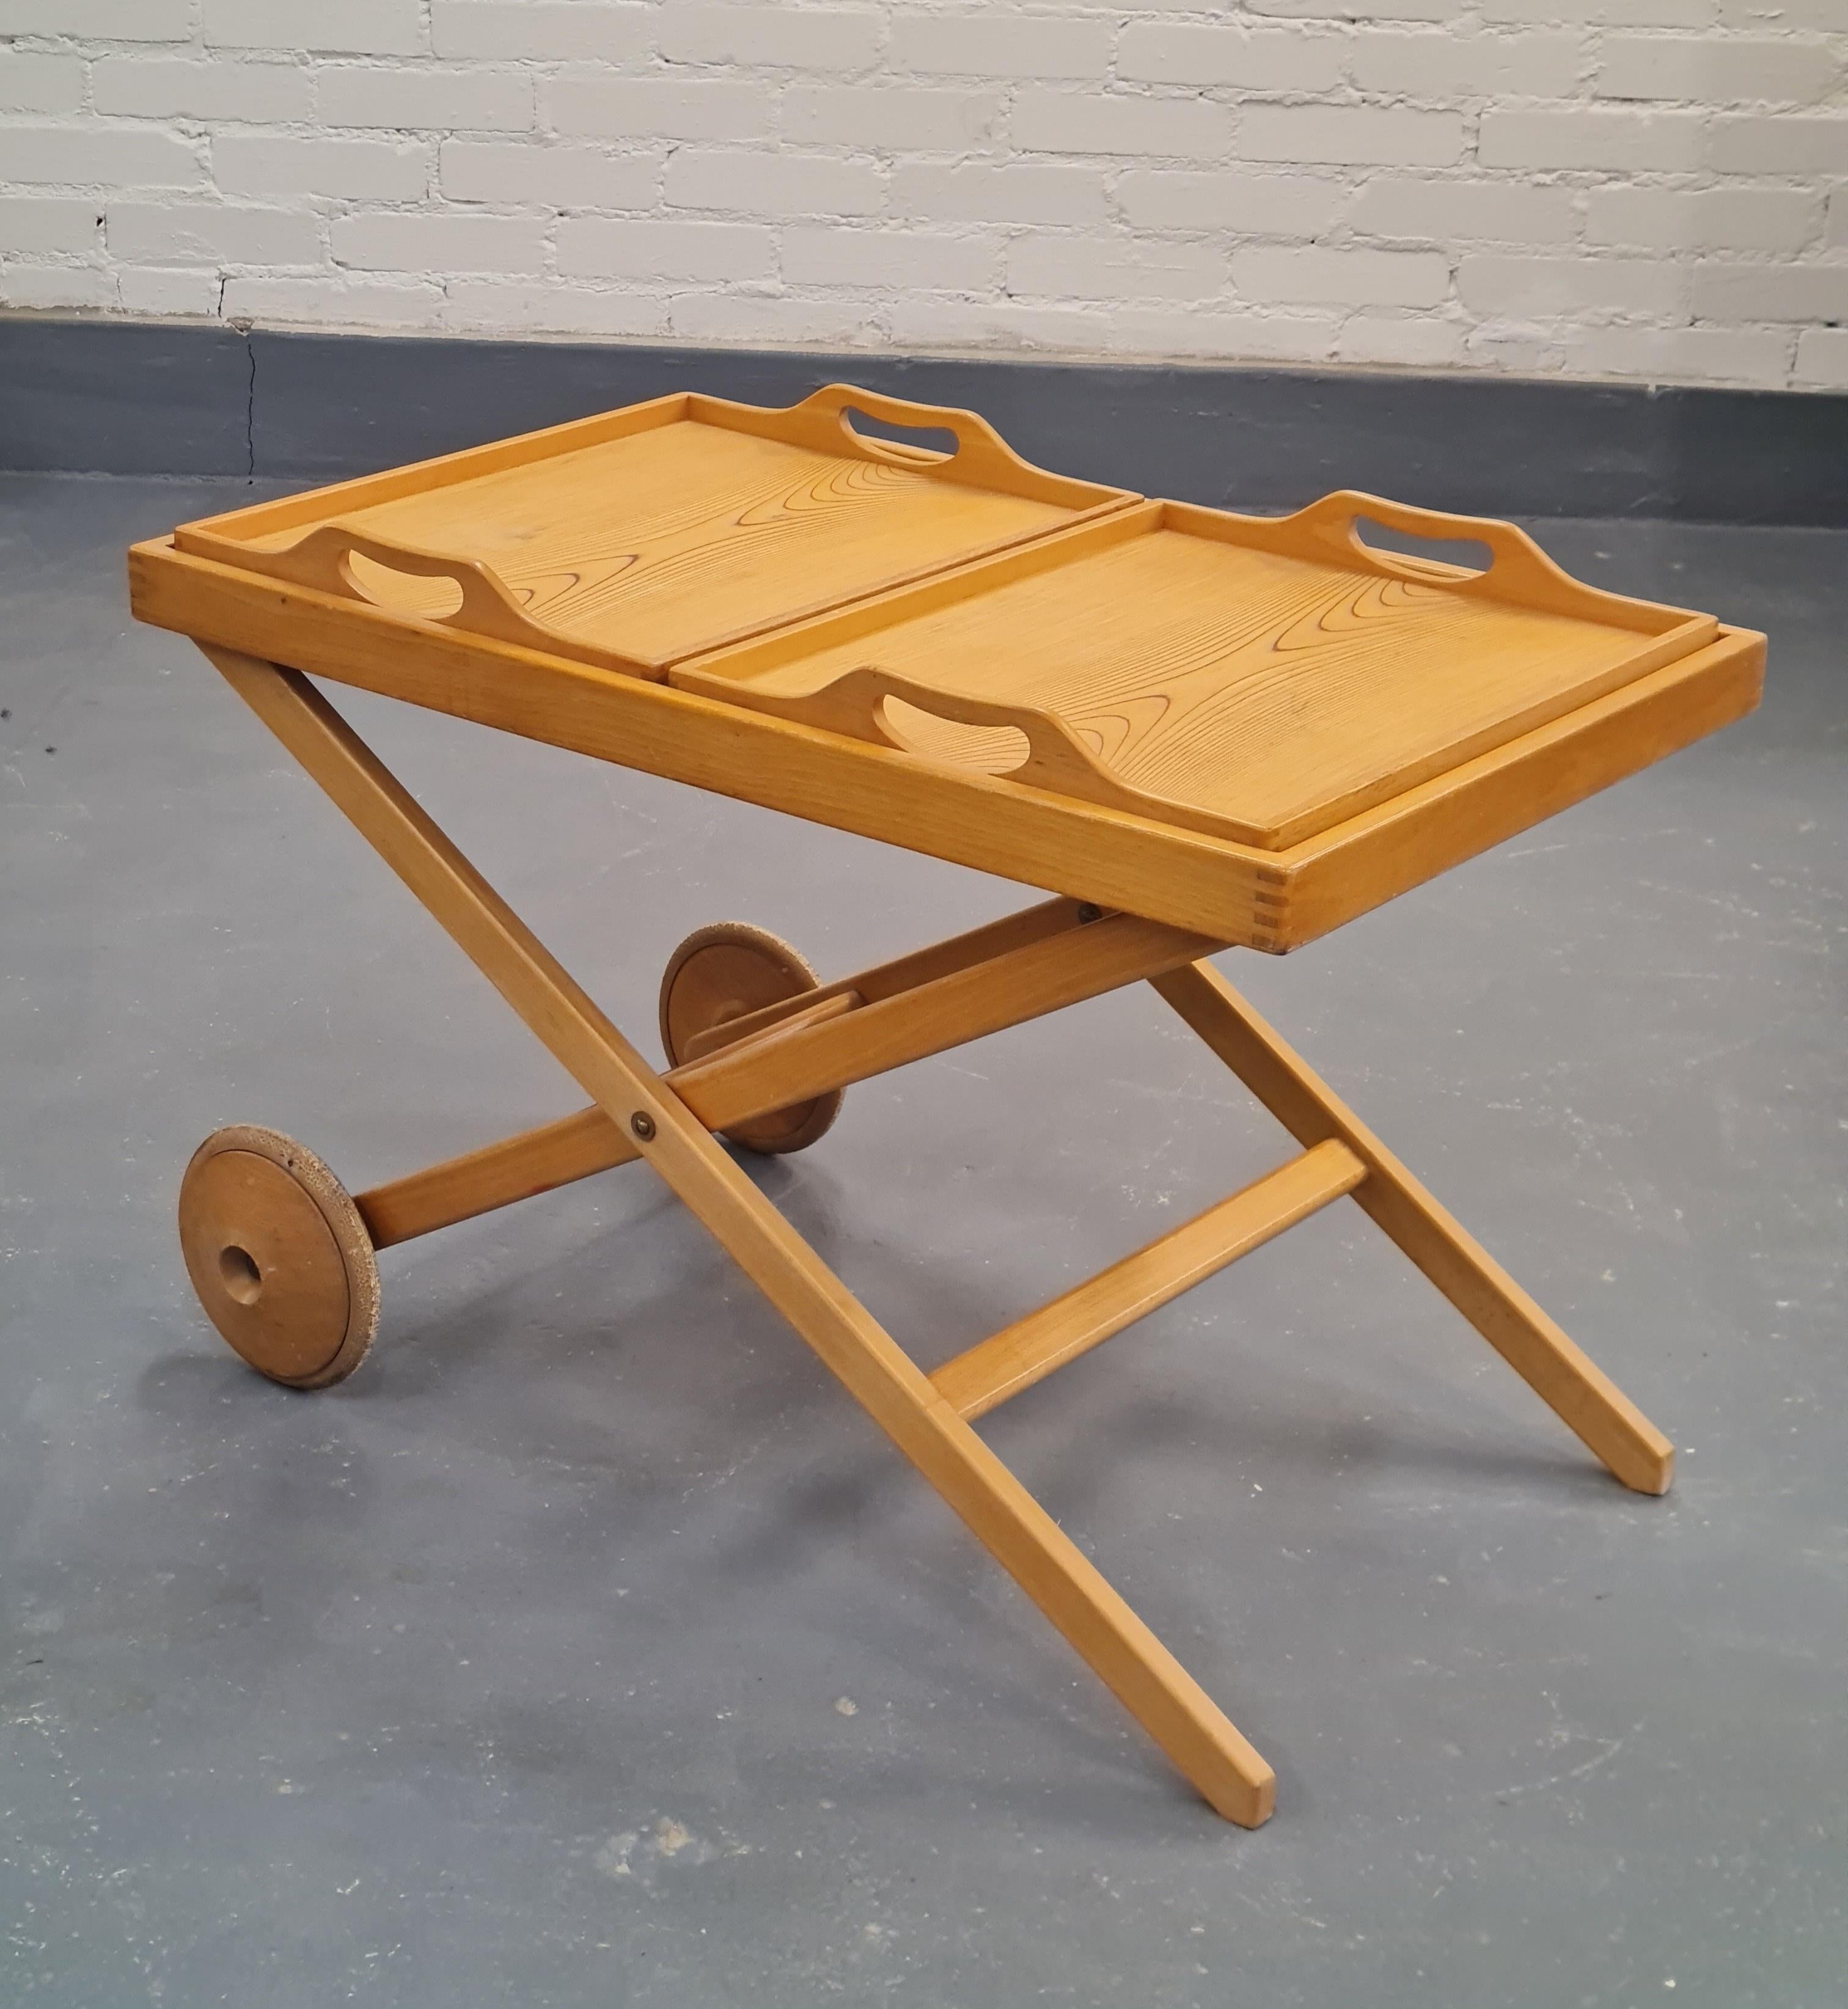 A rare and elegant wooden trolley in lacquered beech and rhythmic birch, manufactured by Asko in Finland for only two years from 1950-1951. The design is a team effort between the world renowned Tapio Wirkkala and Aulis Leinonen, an interior